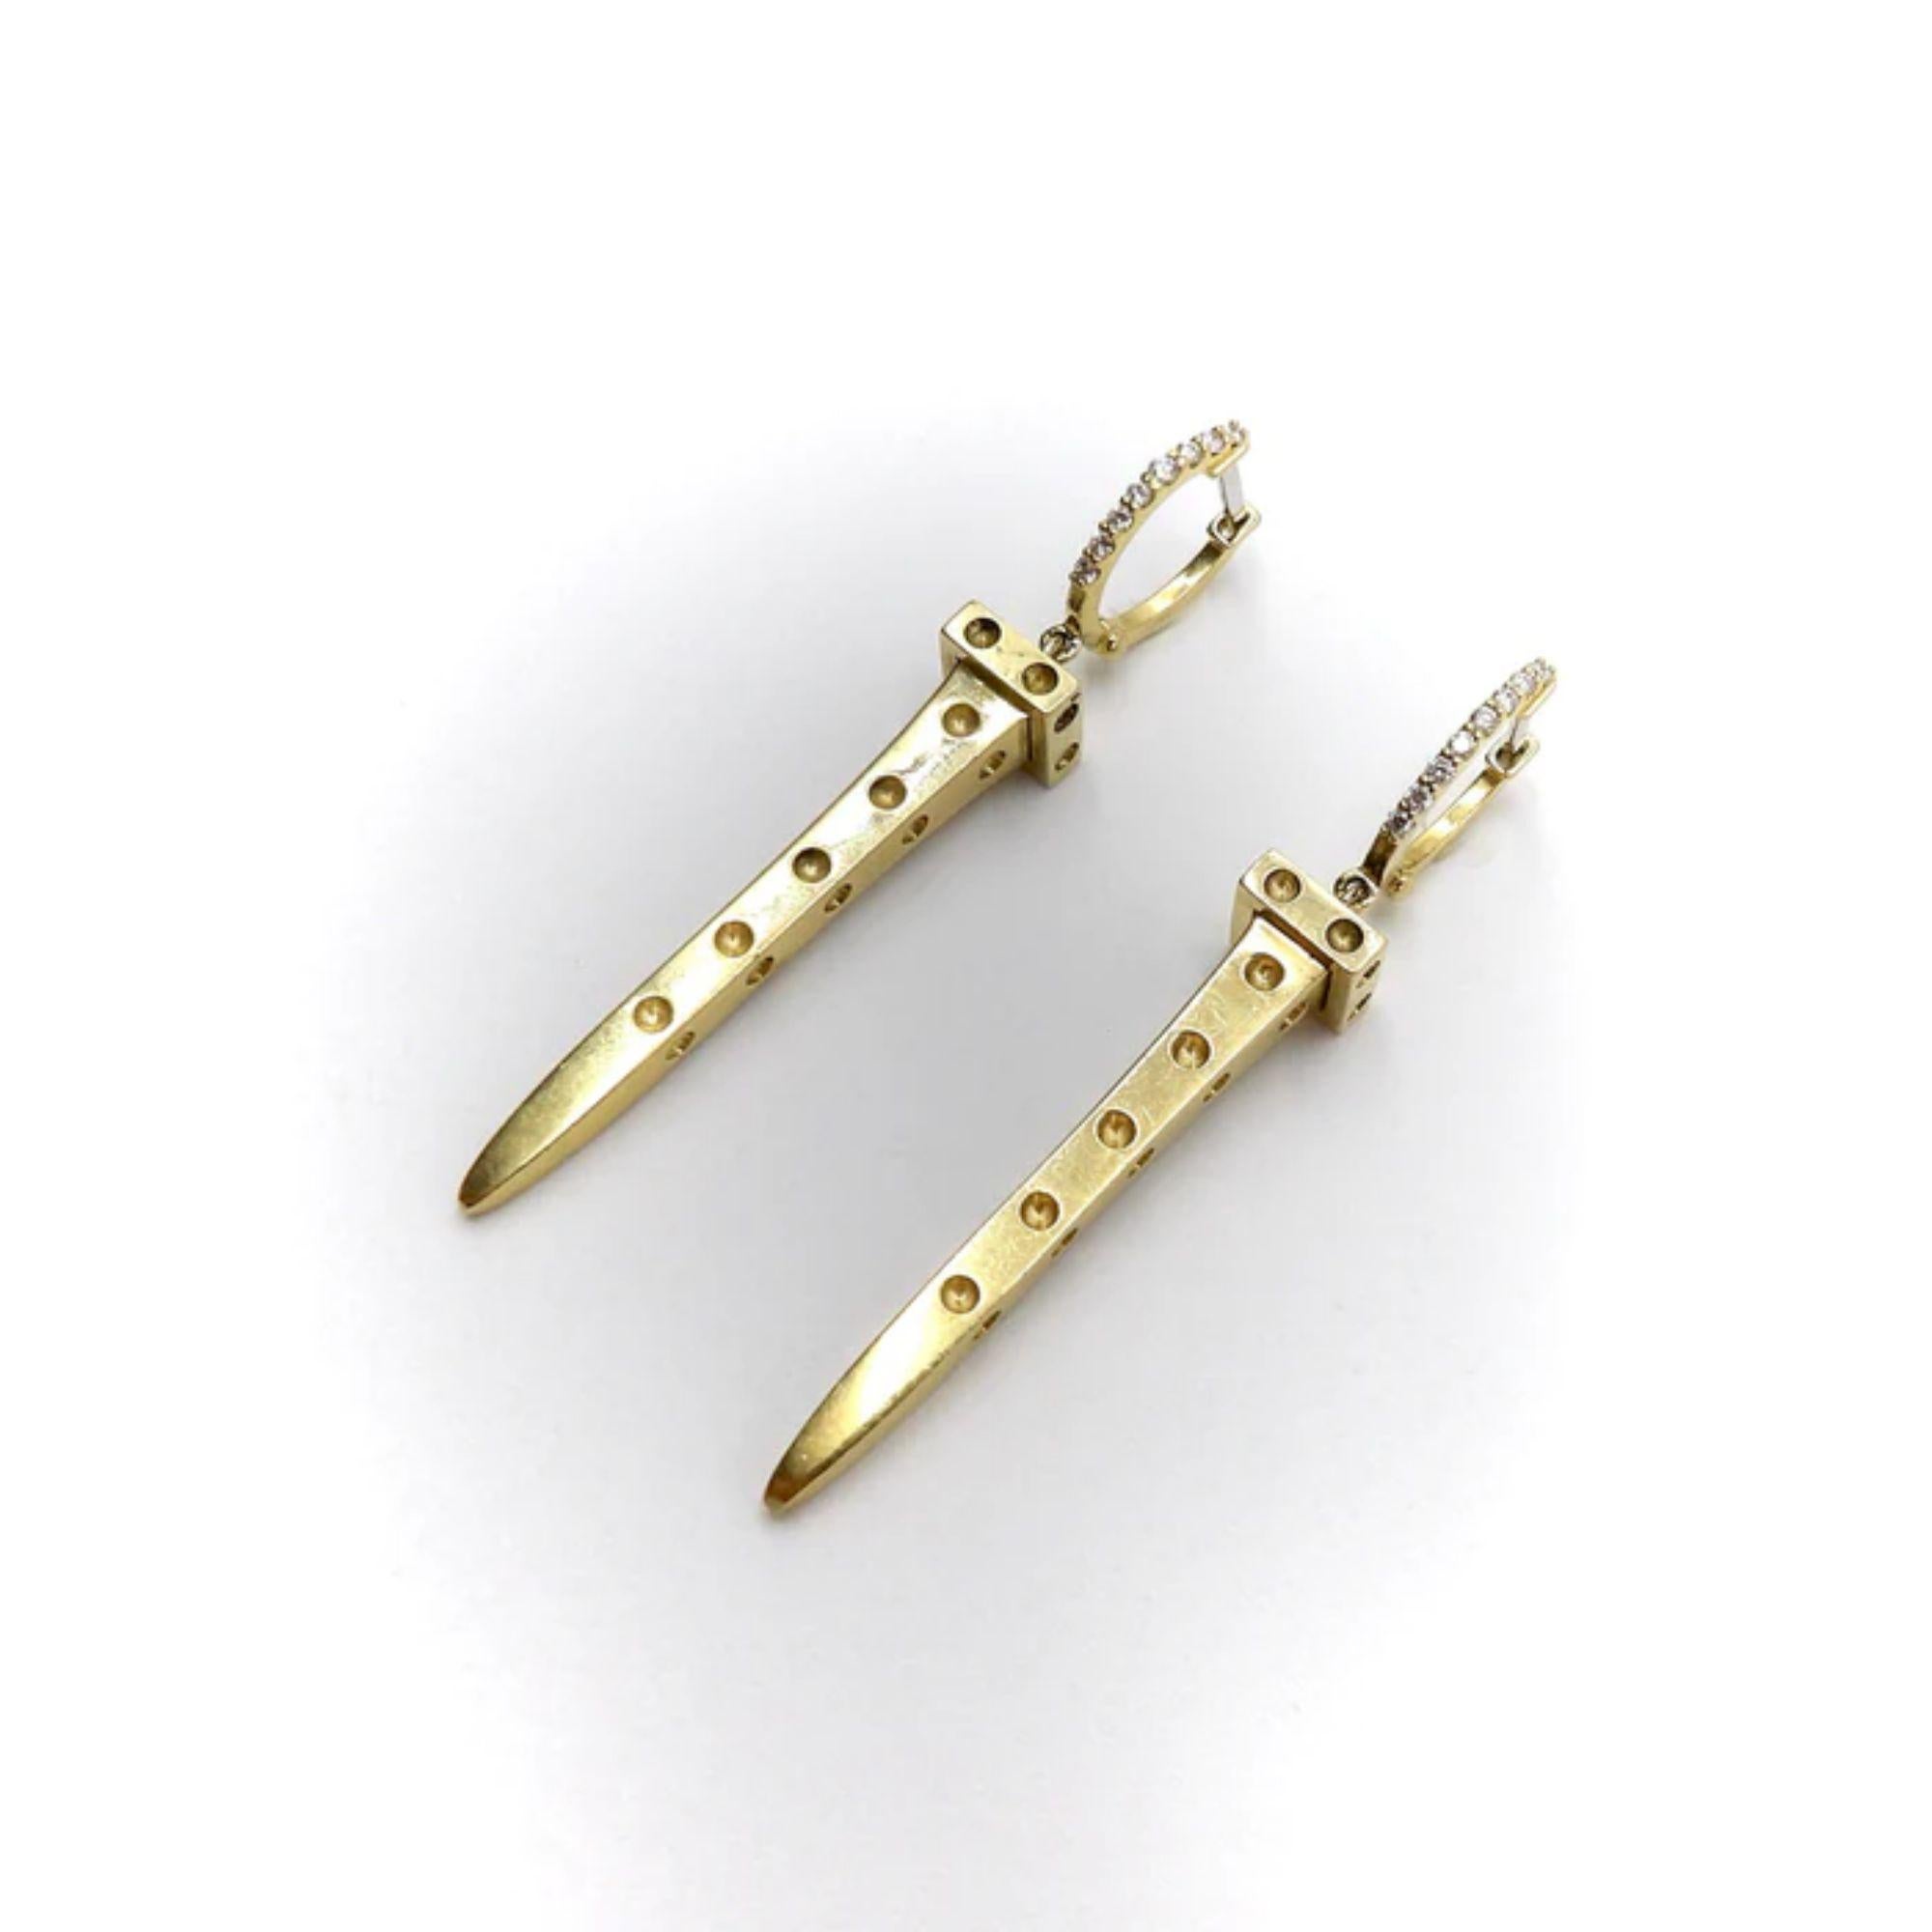 18K Gold Roberto Coin Nail Pois Moi Chiodo Earrings with Diamonds, circa 1990's
 
These stunning 18k gold and diamond pave earrings are designed by Roberto Coin, one of Italy’s most renown jewelry artisans. The earrings are hand etched and carved